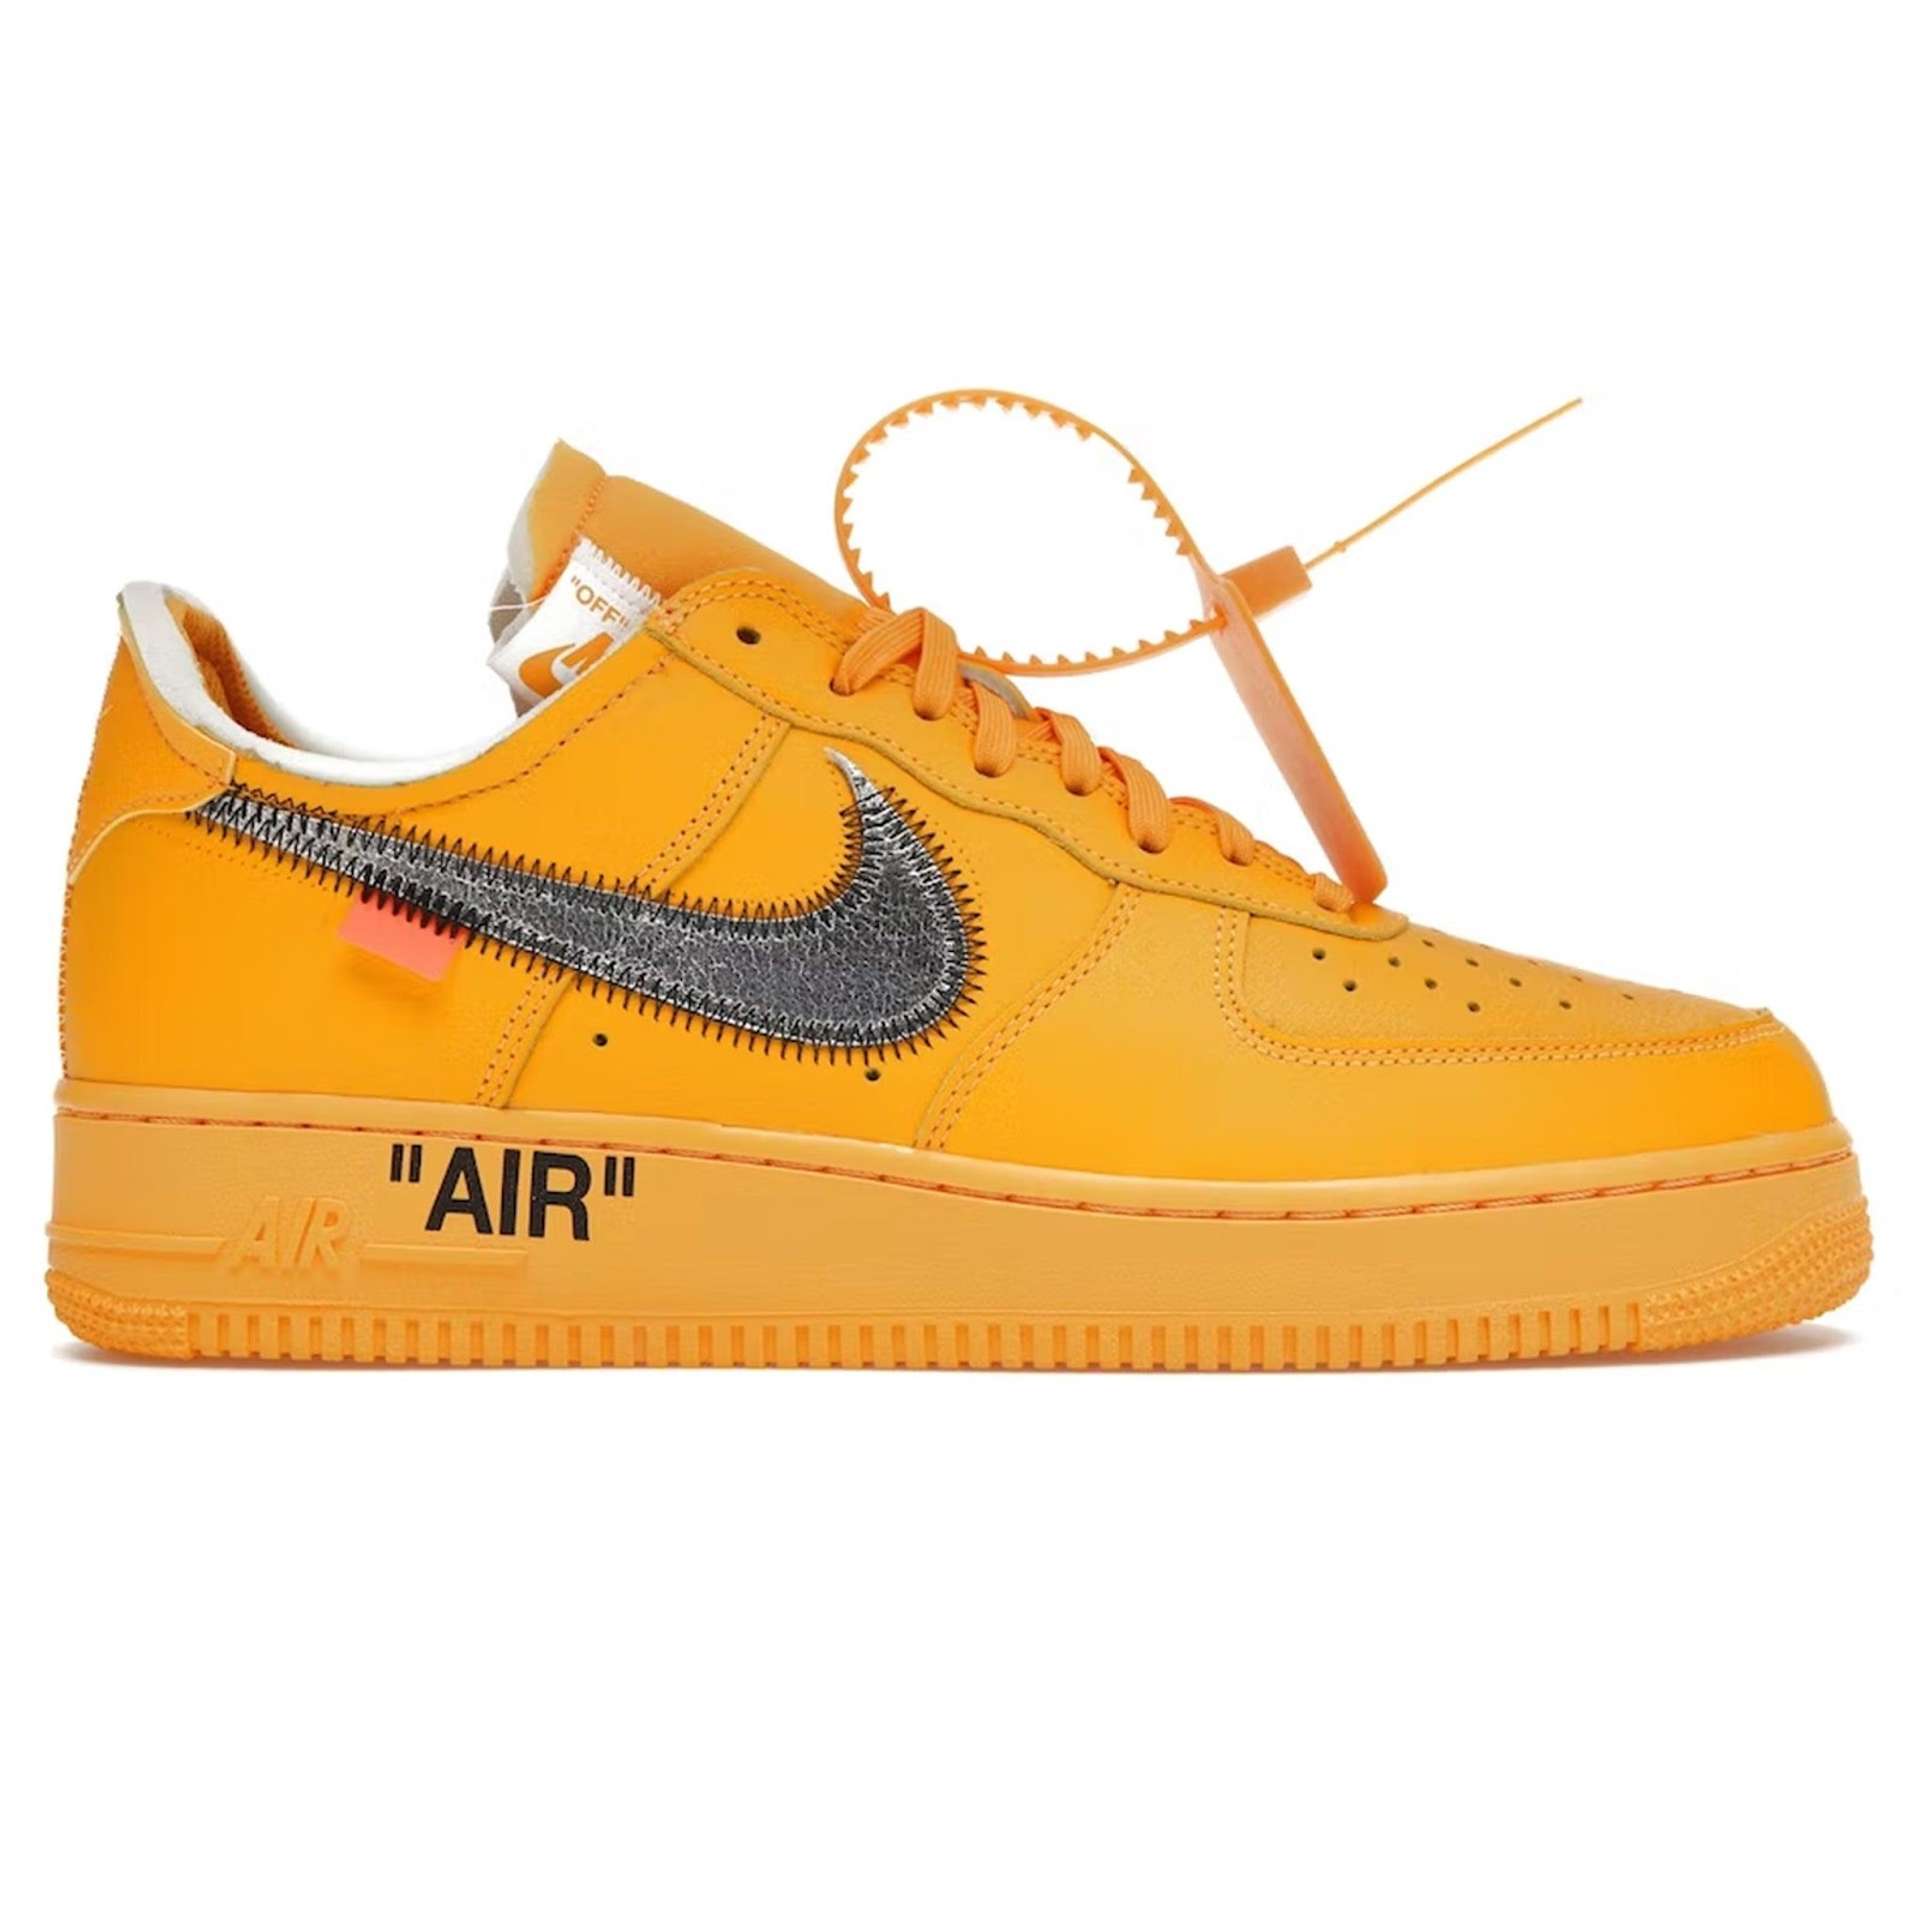 An image of an orange pair of Air Force 1 sneakers from Nike’s 2017 collaboration with brand Off-White.